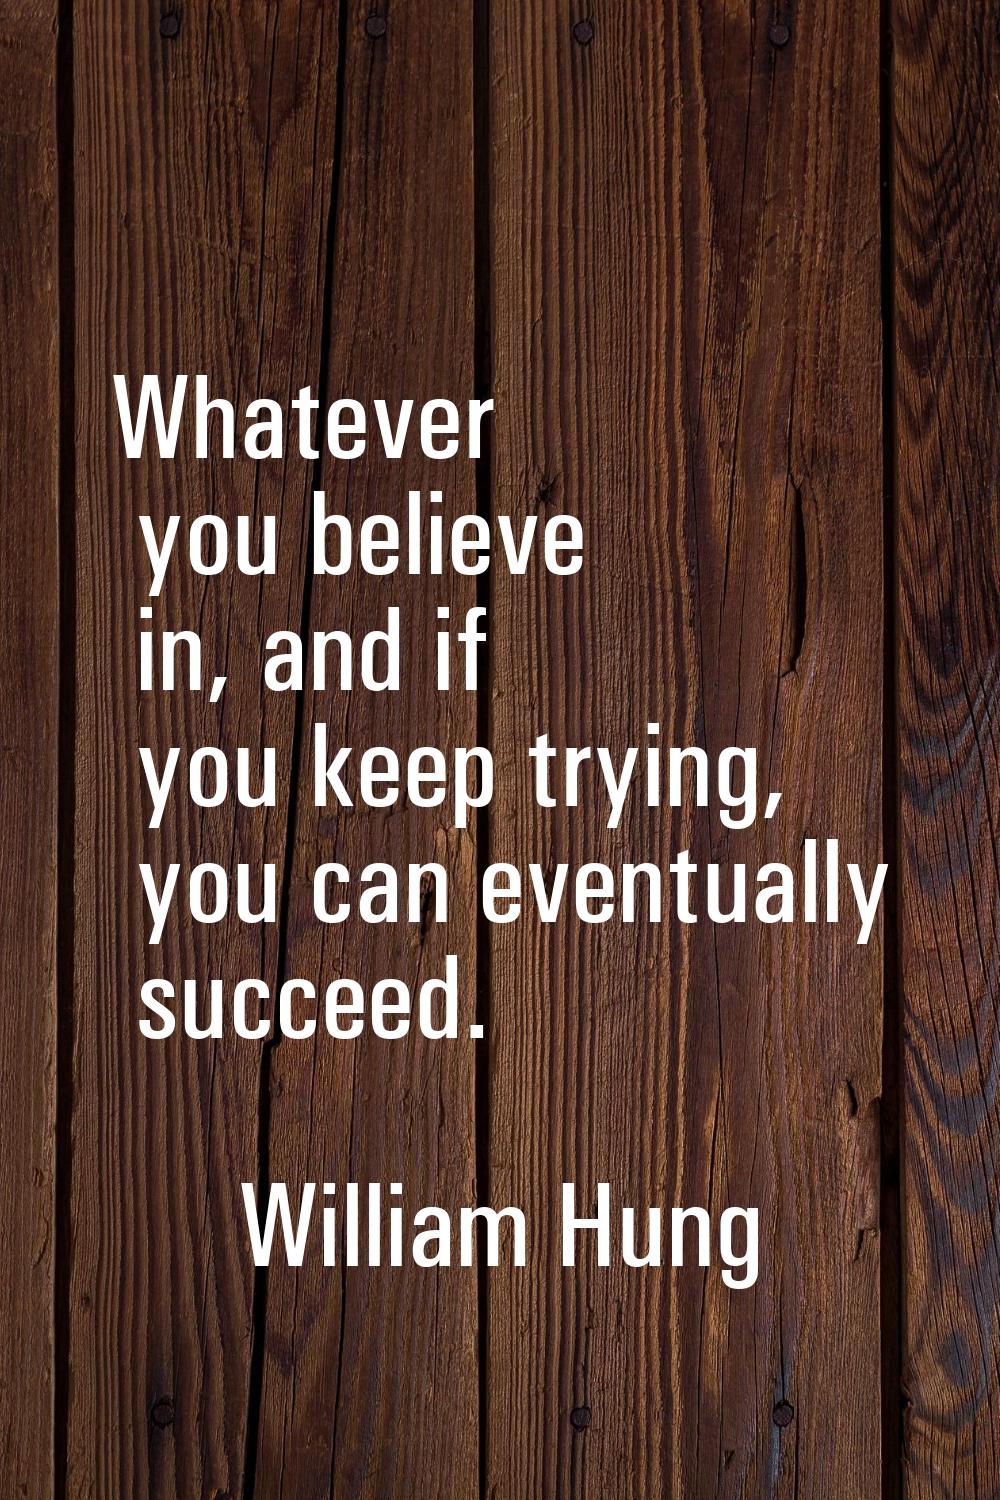 Whatever you believe in, and if you keep trying, you can eventually succeed.